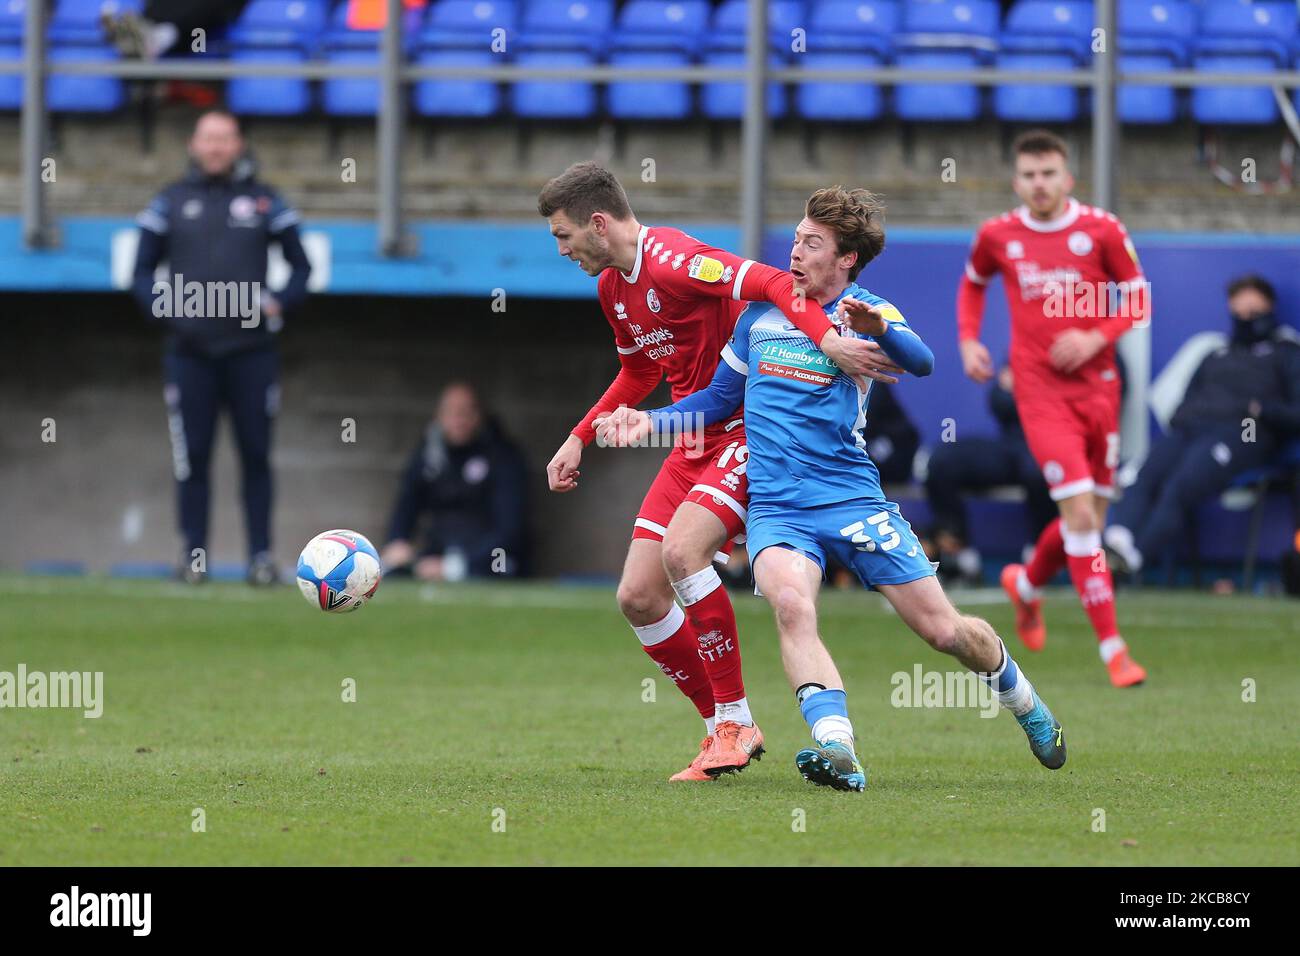 Luke James of Barrow in action with Crawley Town's Jordan Tunnicliffe during the Sky Bet League 2 match between Barrow and Crawley Town at the Holker Street, Barrow-in-Furness on Saturday 20th March 2021. (Photo by Mark Fletcher/MI News/NurPhoto) Stock Photo